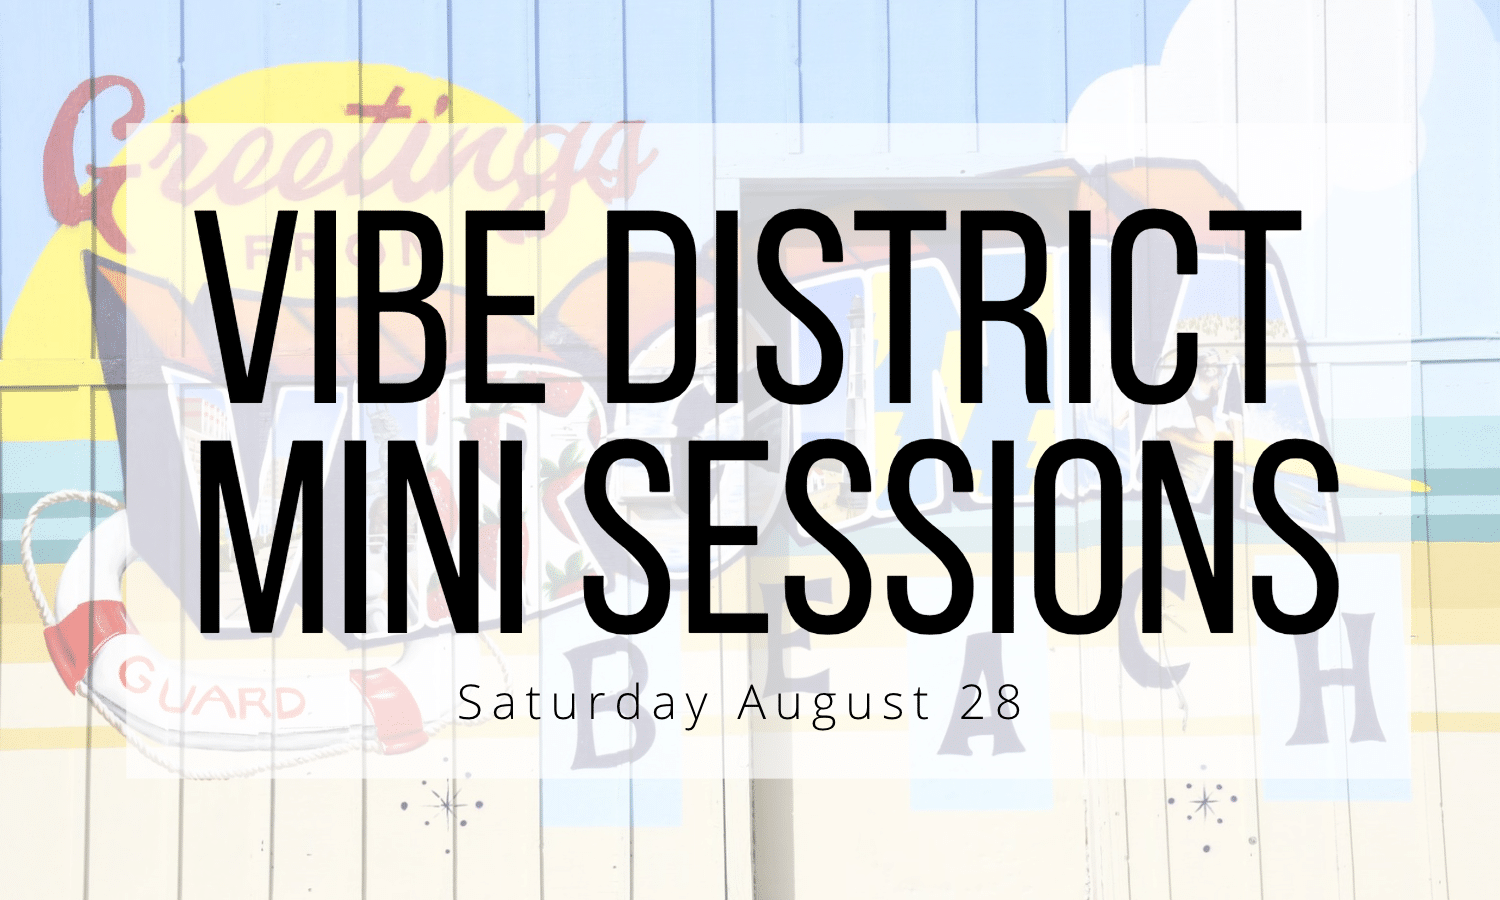 Vibe district mini photo sessions in virginia beach august 28